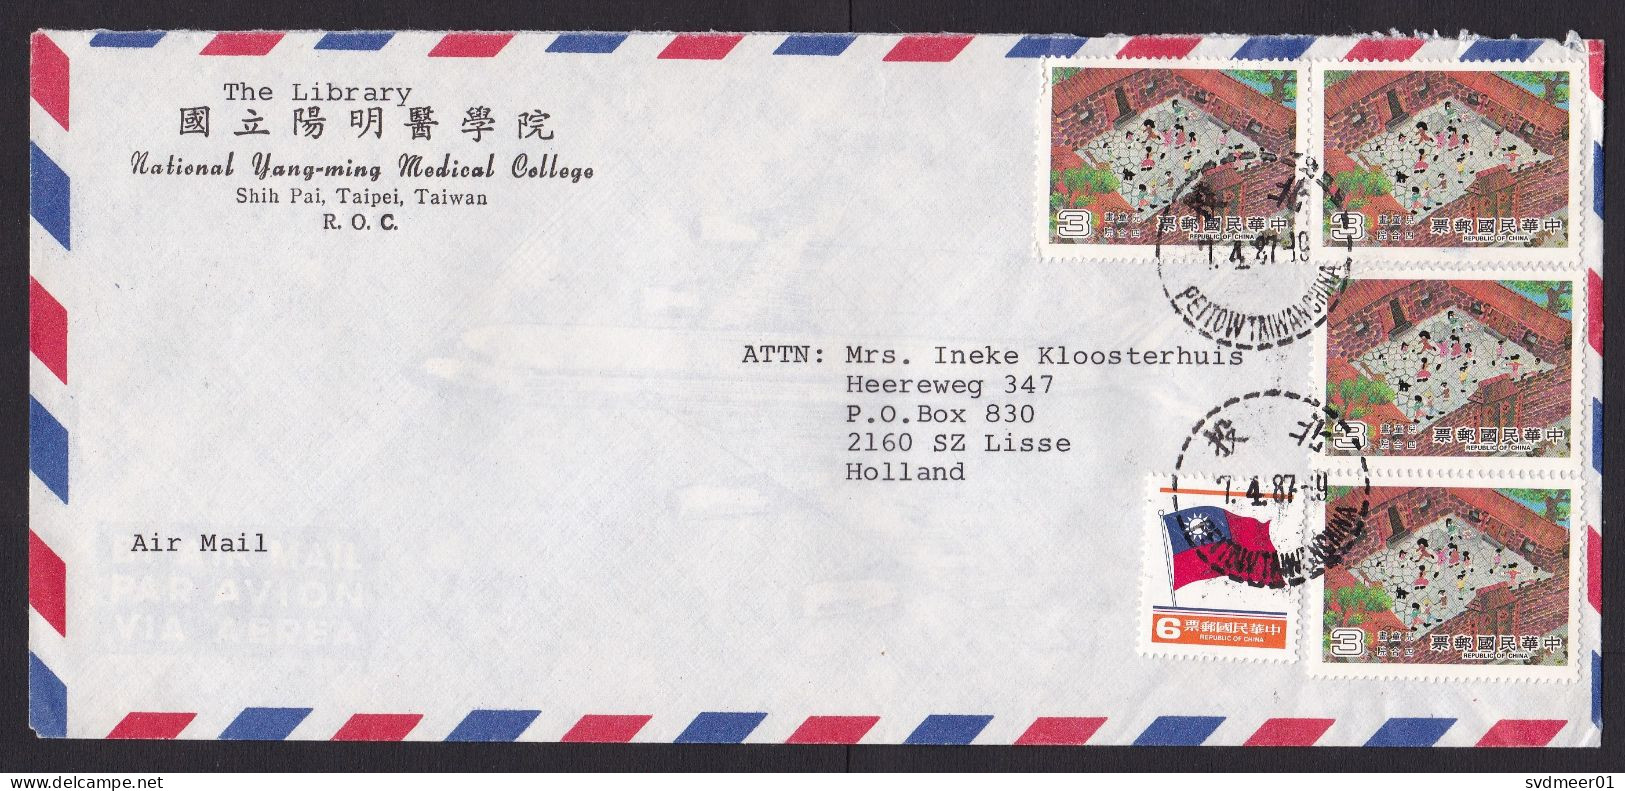 Taiwan: Airmail Cover To Netherlands, 1987, 5 Stamps, Flag, Children Drawing, Child Playing (traces Of Use) - Covers & Documents